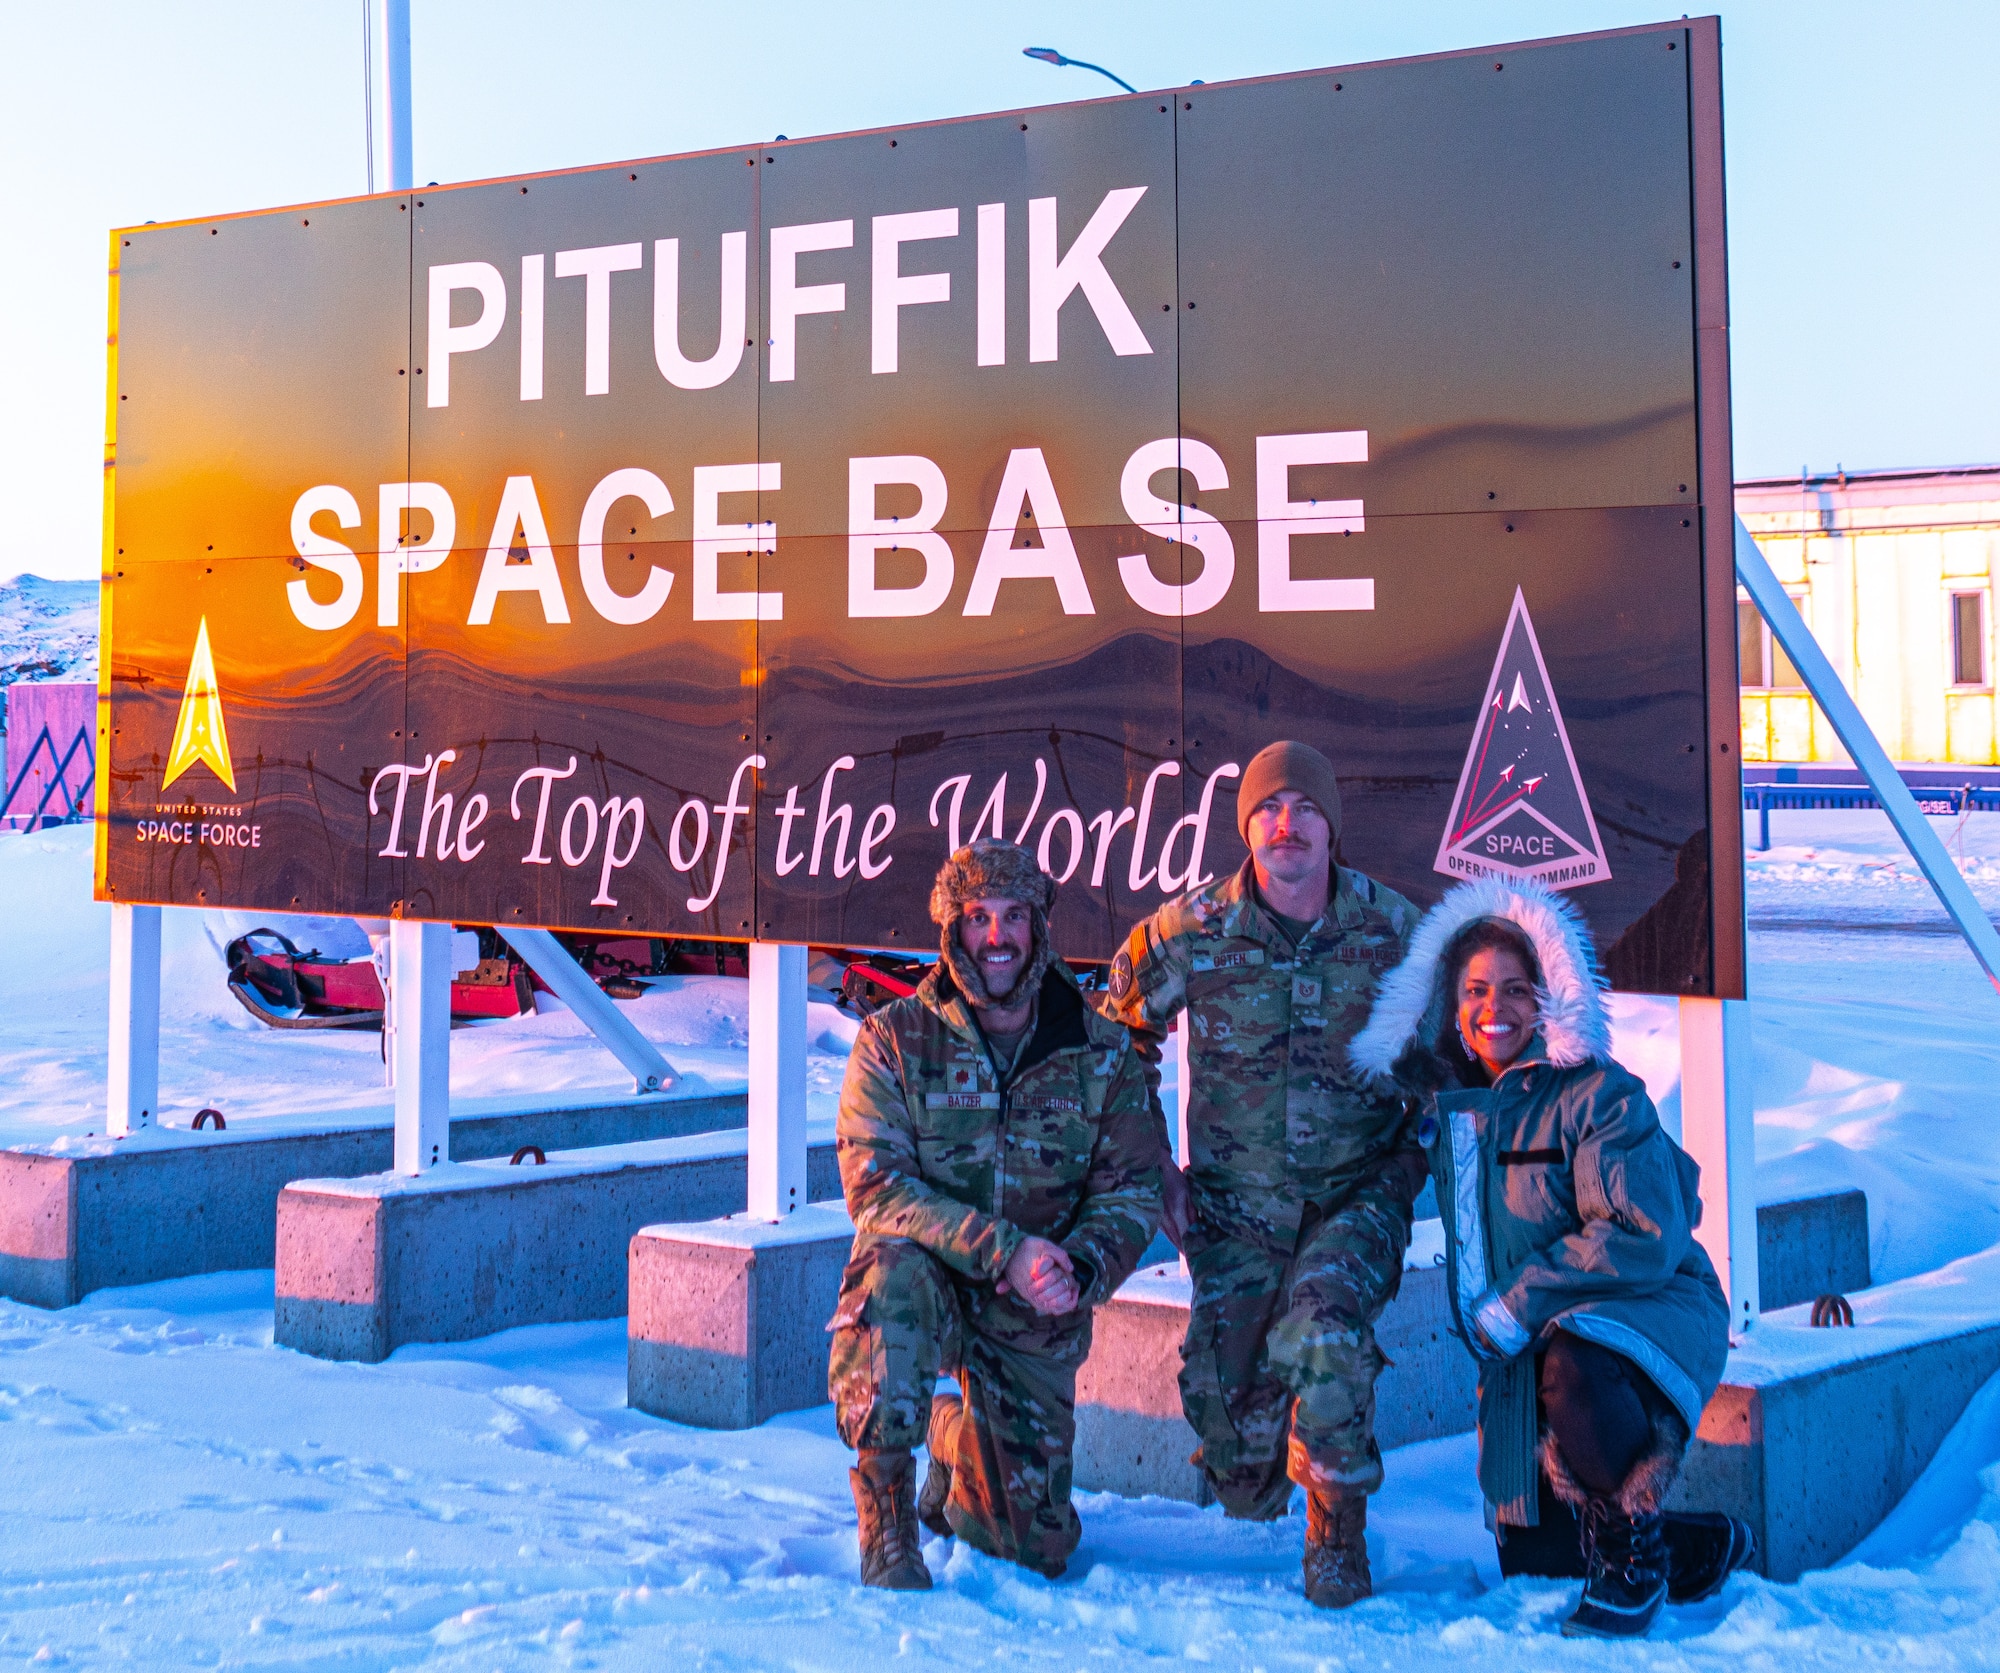 U.S. Air Force Maj. Sean Batzer, Schriever Space Force Base’s Operational Support Team flight commander, and his team brave arctic temperatures while providing servicemembers with holistic health support at Pituffik Space Base, Greenland, March 18, 2024. The purpose of the visit was to increase servicemembers’ understanding of the impact their environment plays on their physical health while providing them with the tools to combat these daily stressors in order to optimize their performance and prevent potential injuries. (Courtesy photo provided by U.S. Air Force Maj. Sean Batzer)